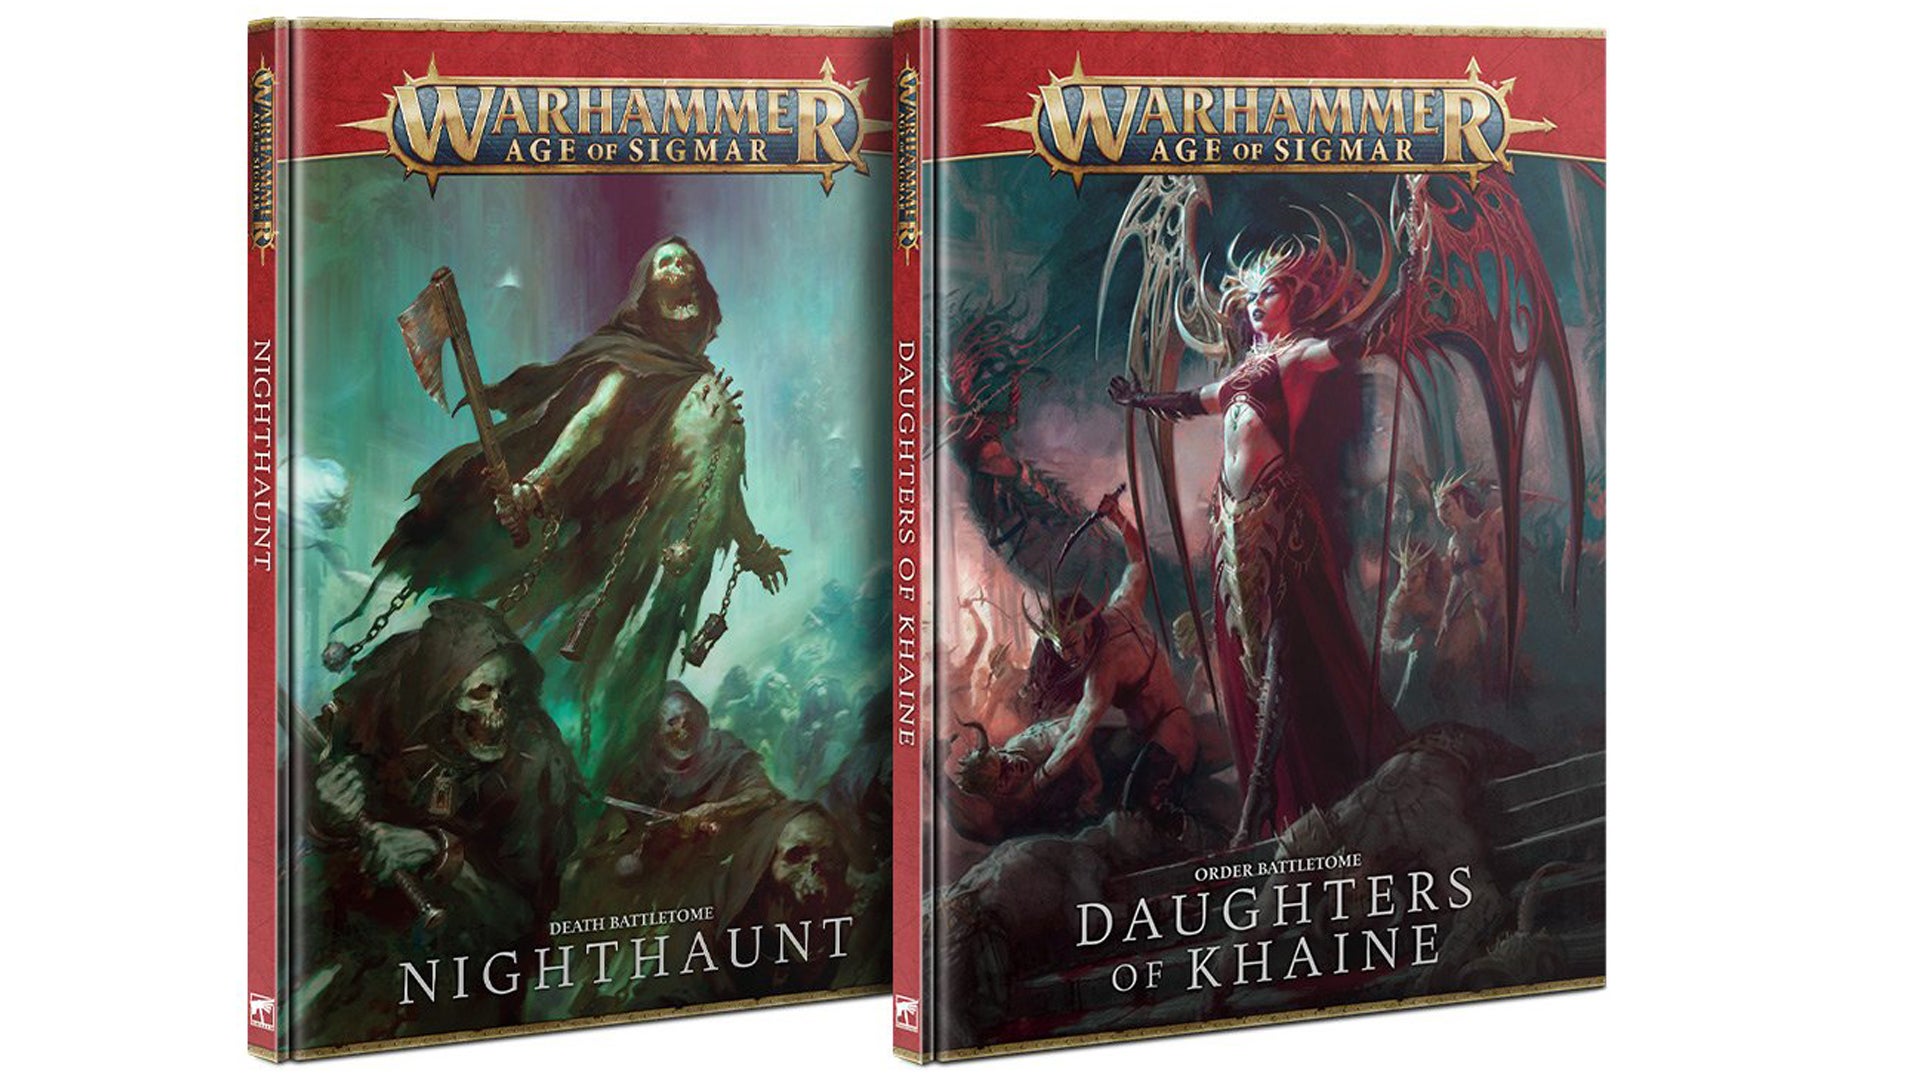 The battletomes for the Nighthaunt and Daughters of Kaine factions for Warhammer: Age of Sigmar